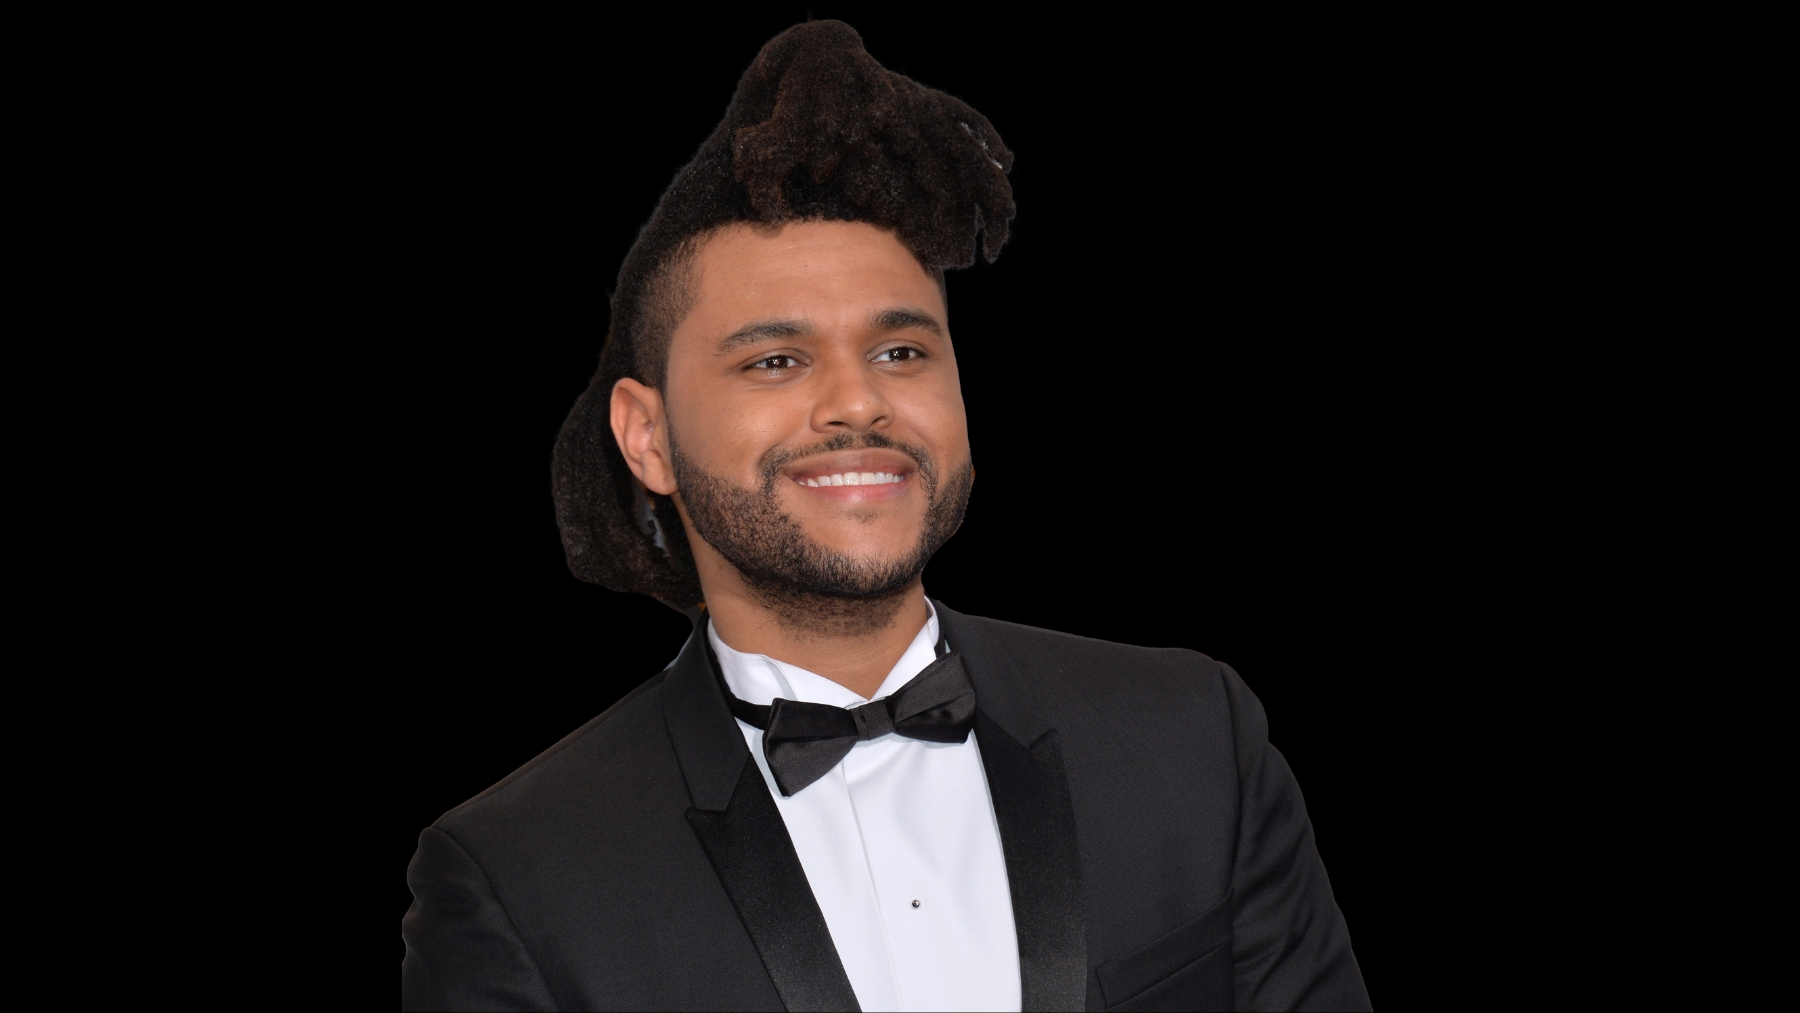 The Weeknd Provides 4 Million Meals to Support Humanitarian Efforts in Gaza